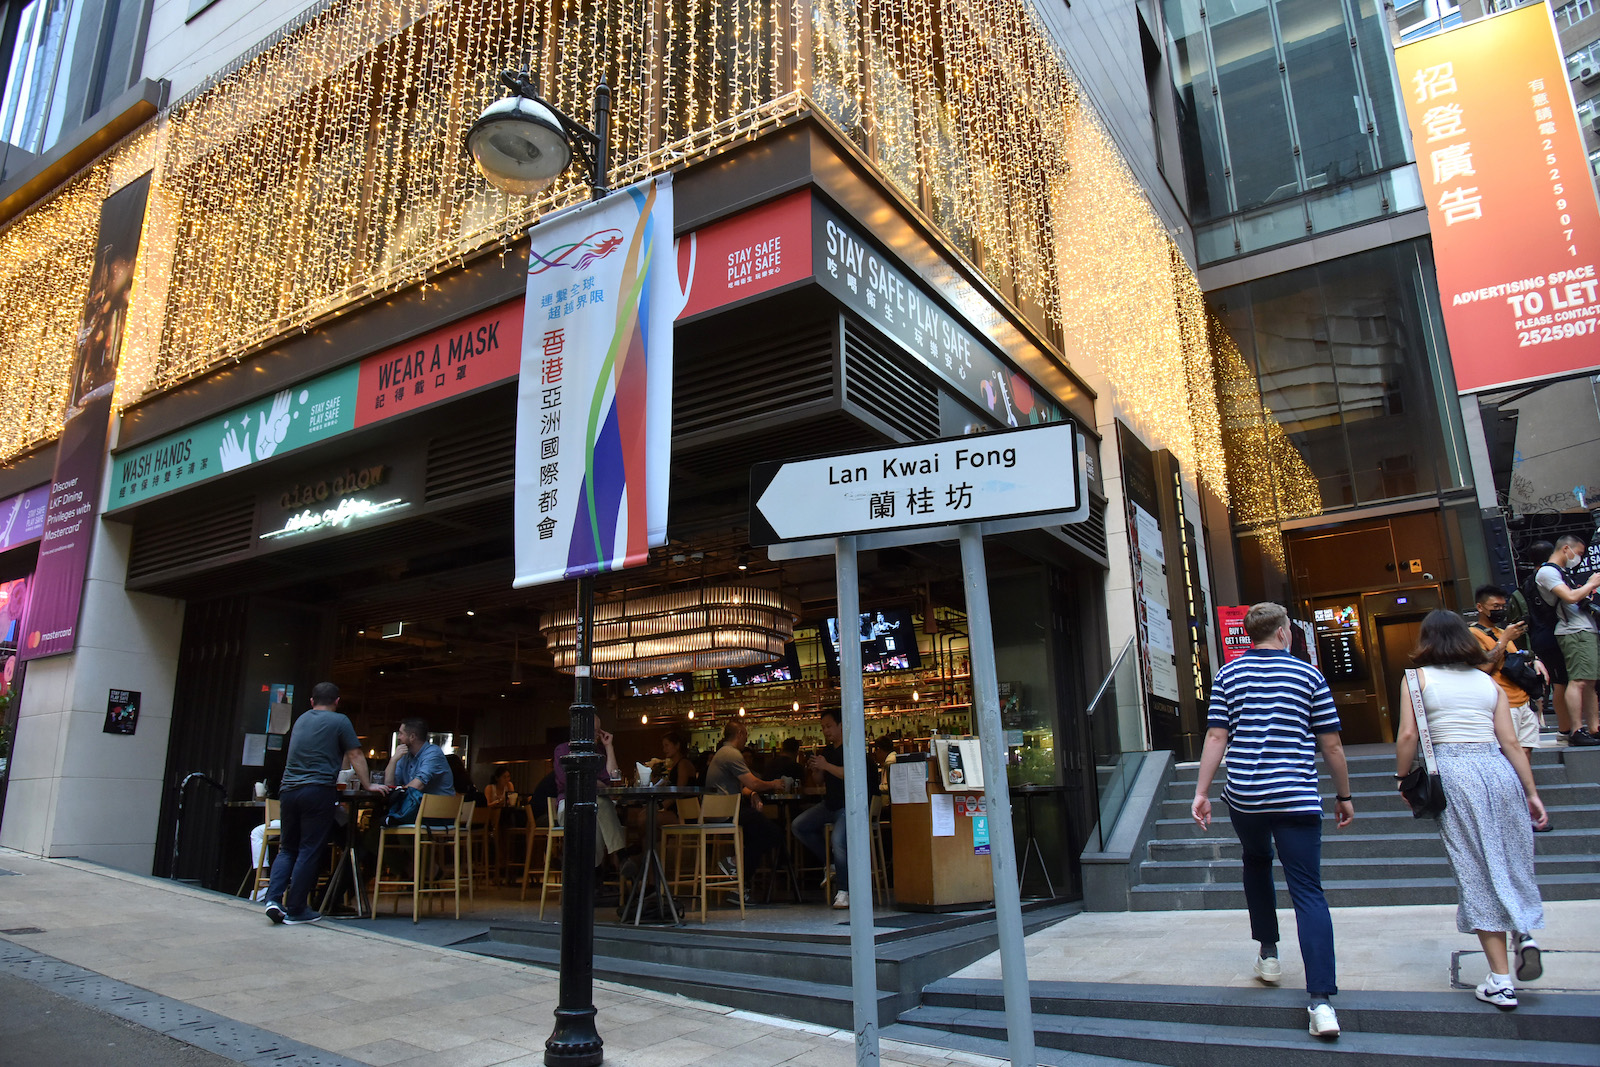 Lan Kwai Fong in Central. Photo via Hong Kong government Information Services Department